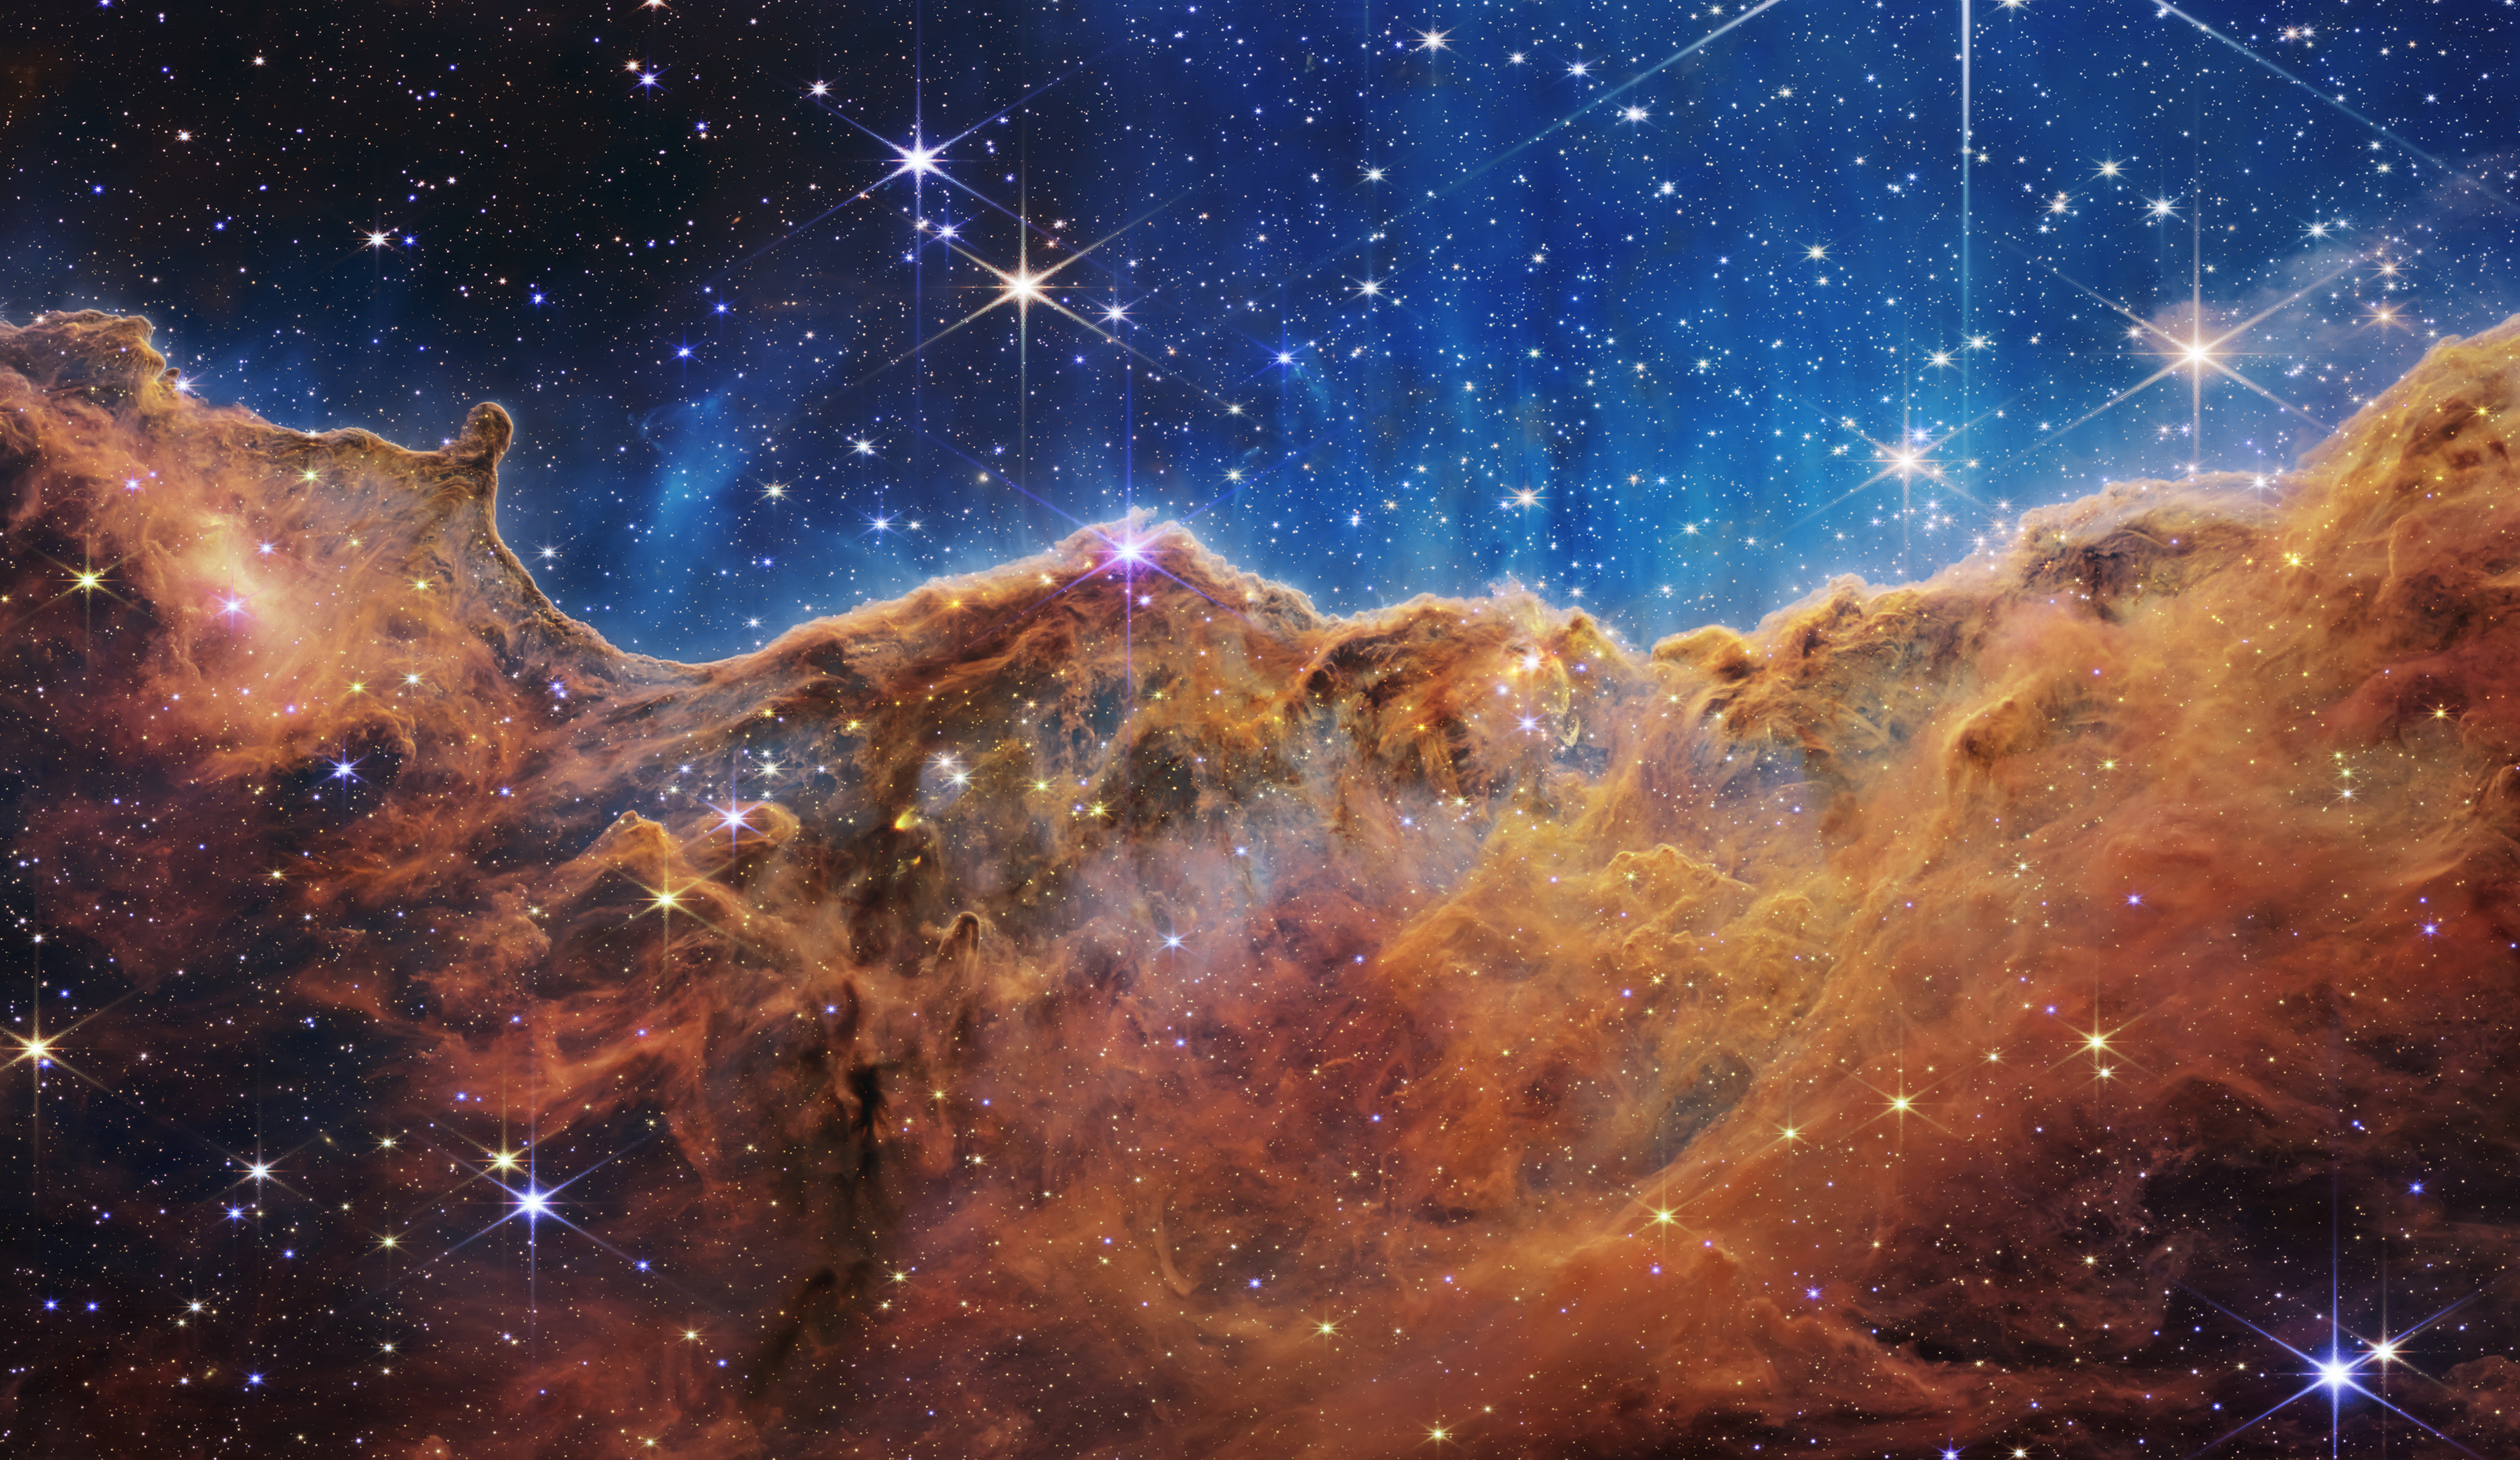 Image of the Cosmic Cliffs